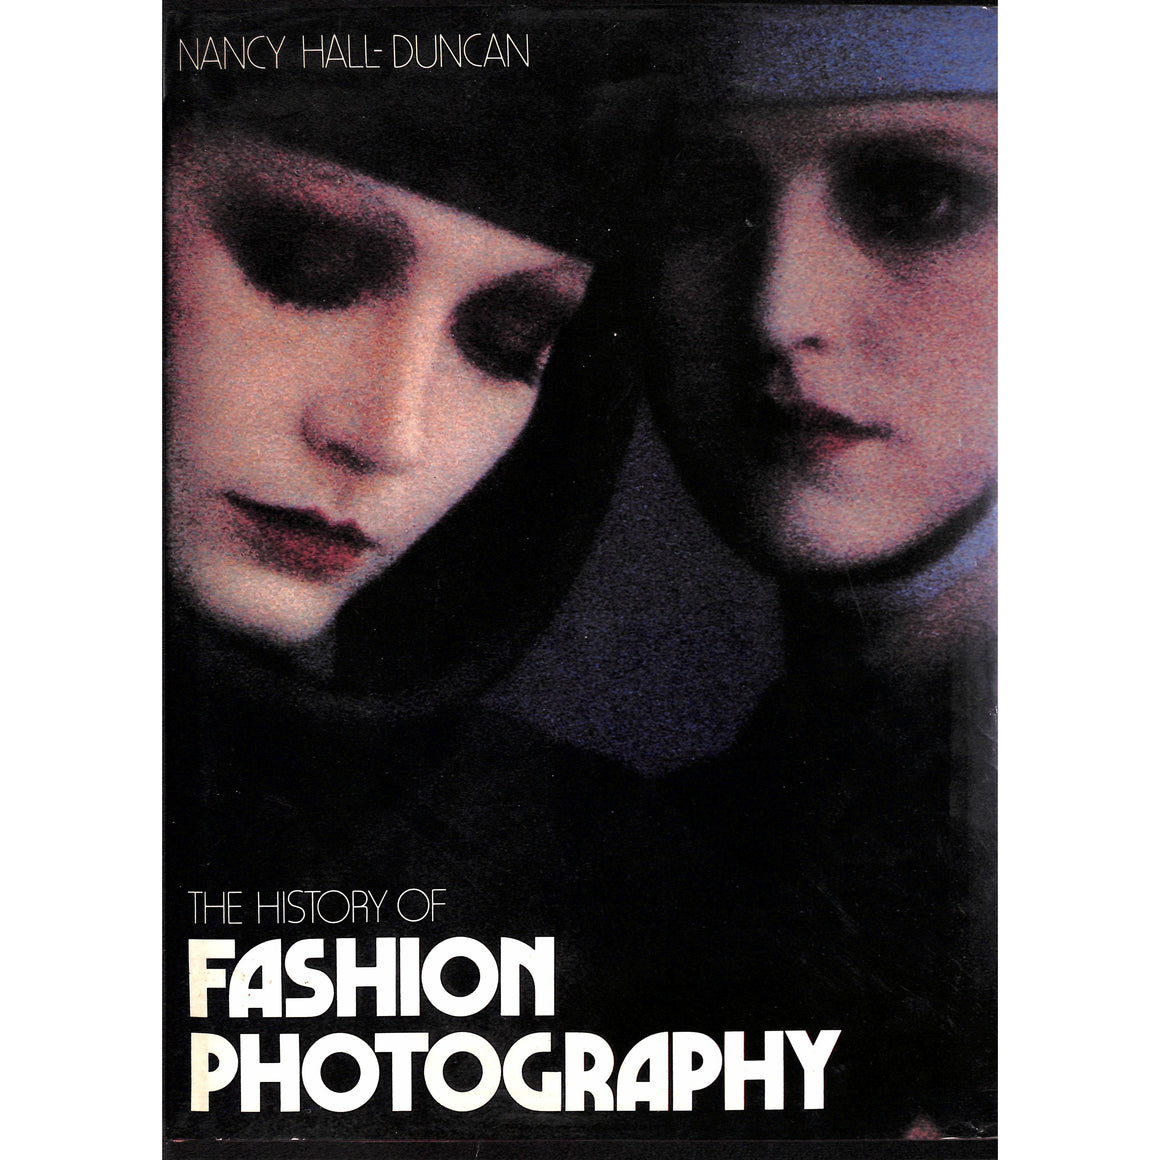 The History of Fashion Photography